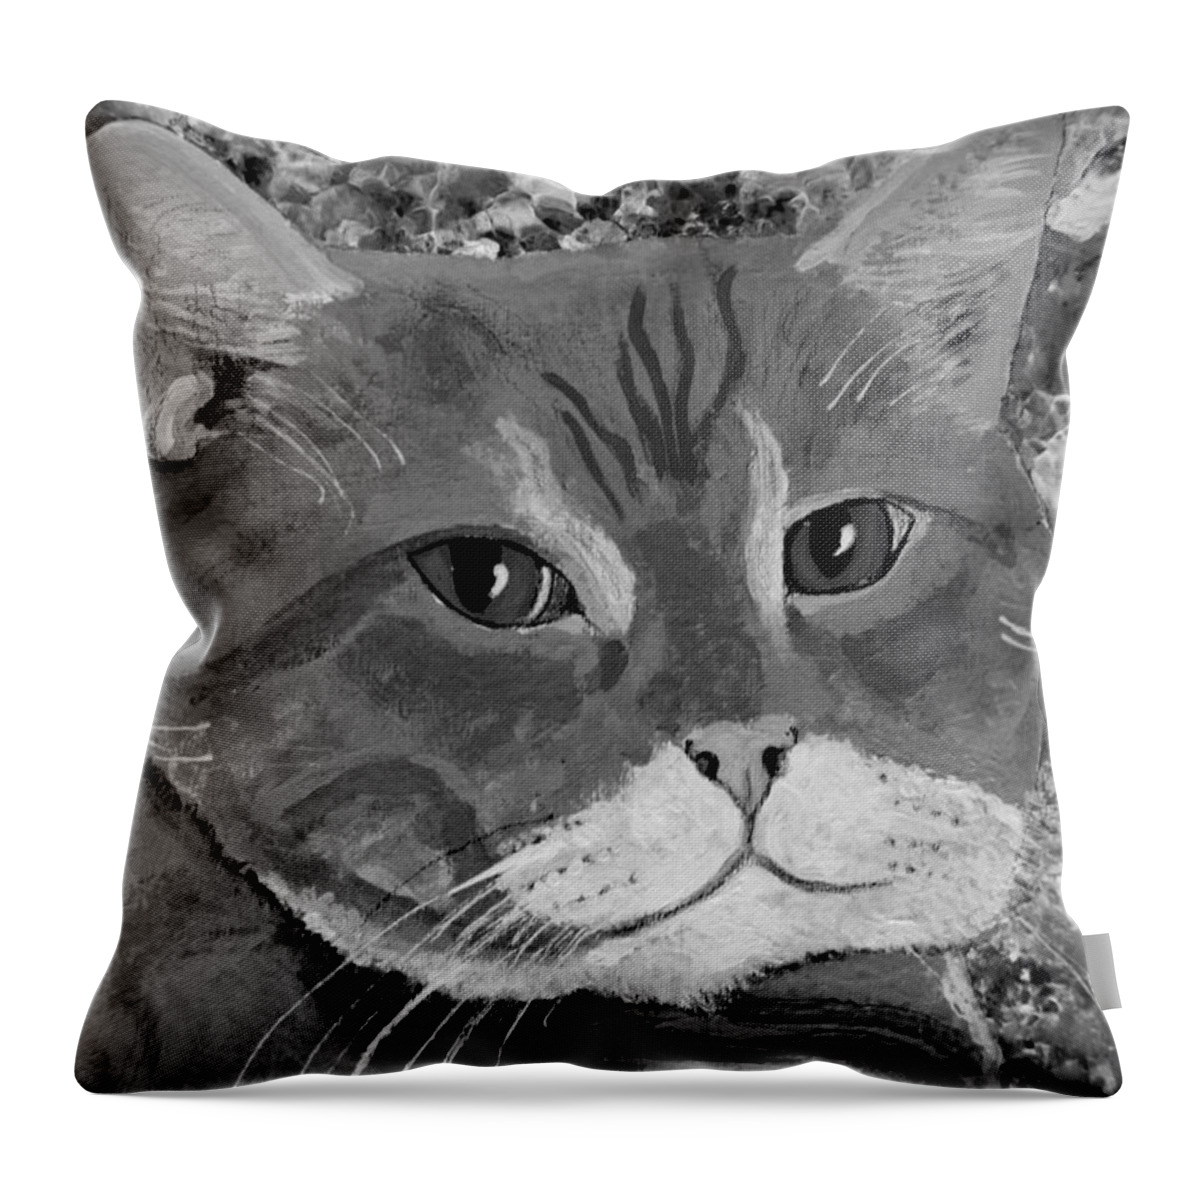 Cats Throw Pillow featuring the painting Nice Kitty by Pj LockhArt